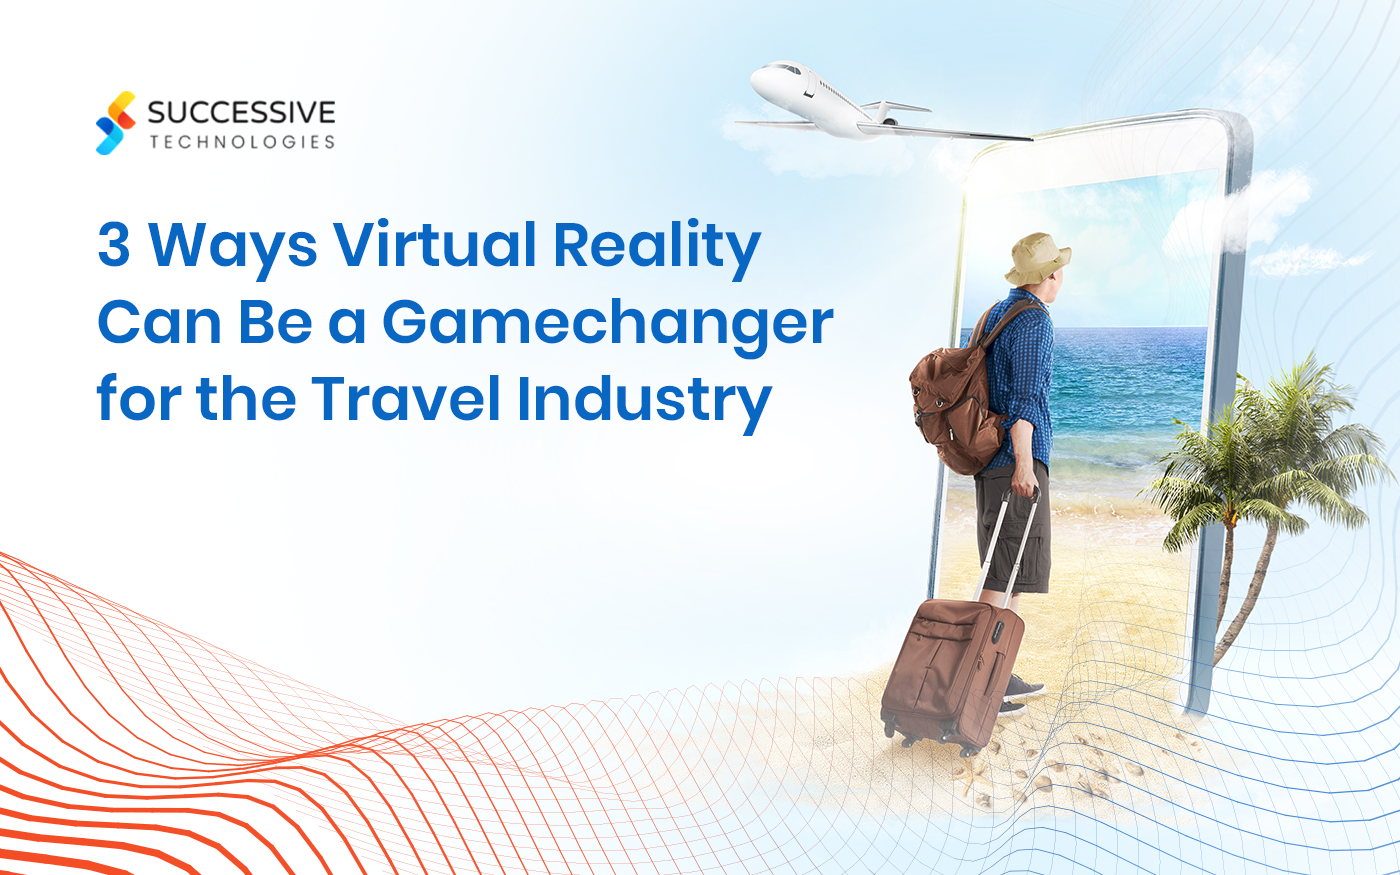 3 Ways Virtual Reality Can Be a Gamechanger for the Travel Industry